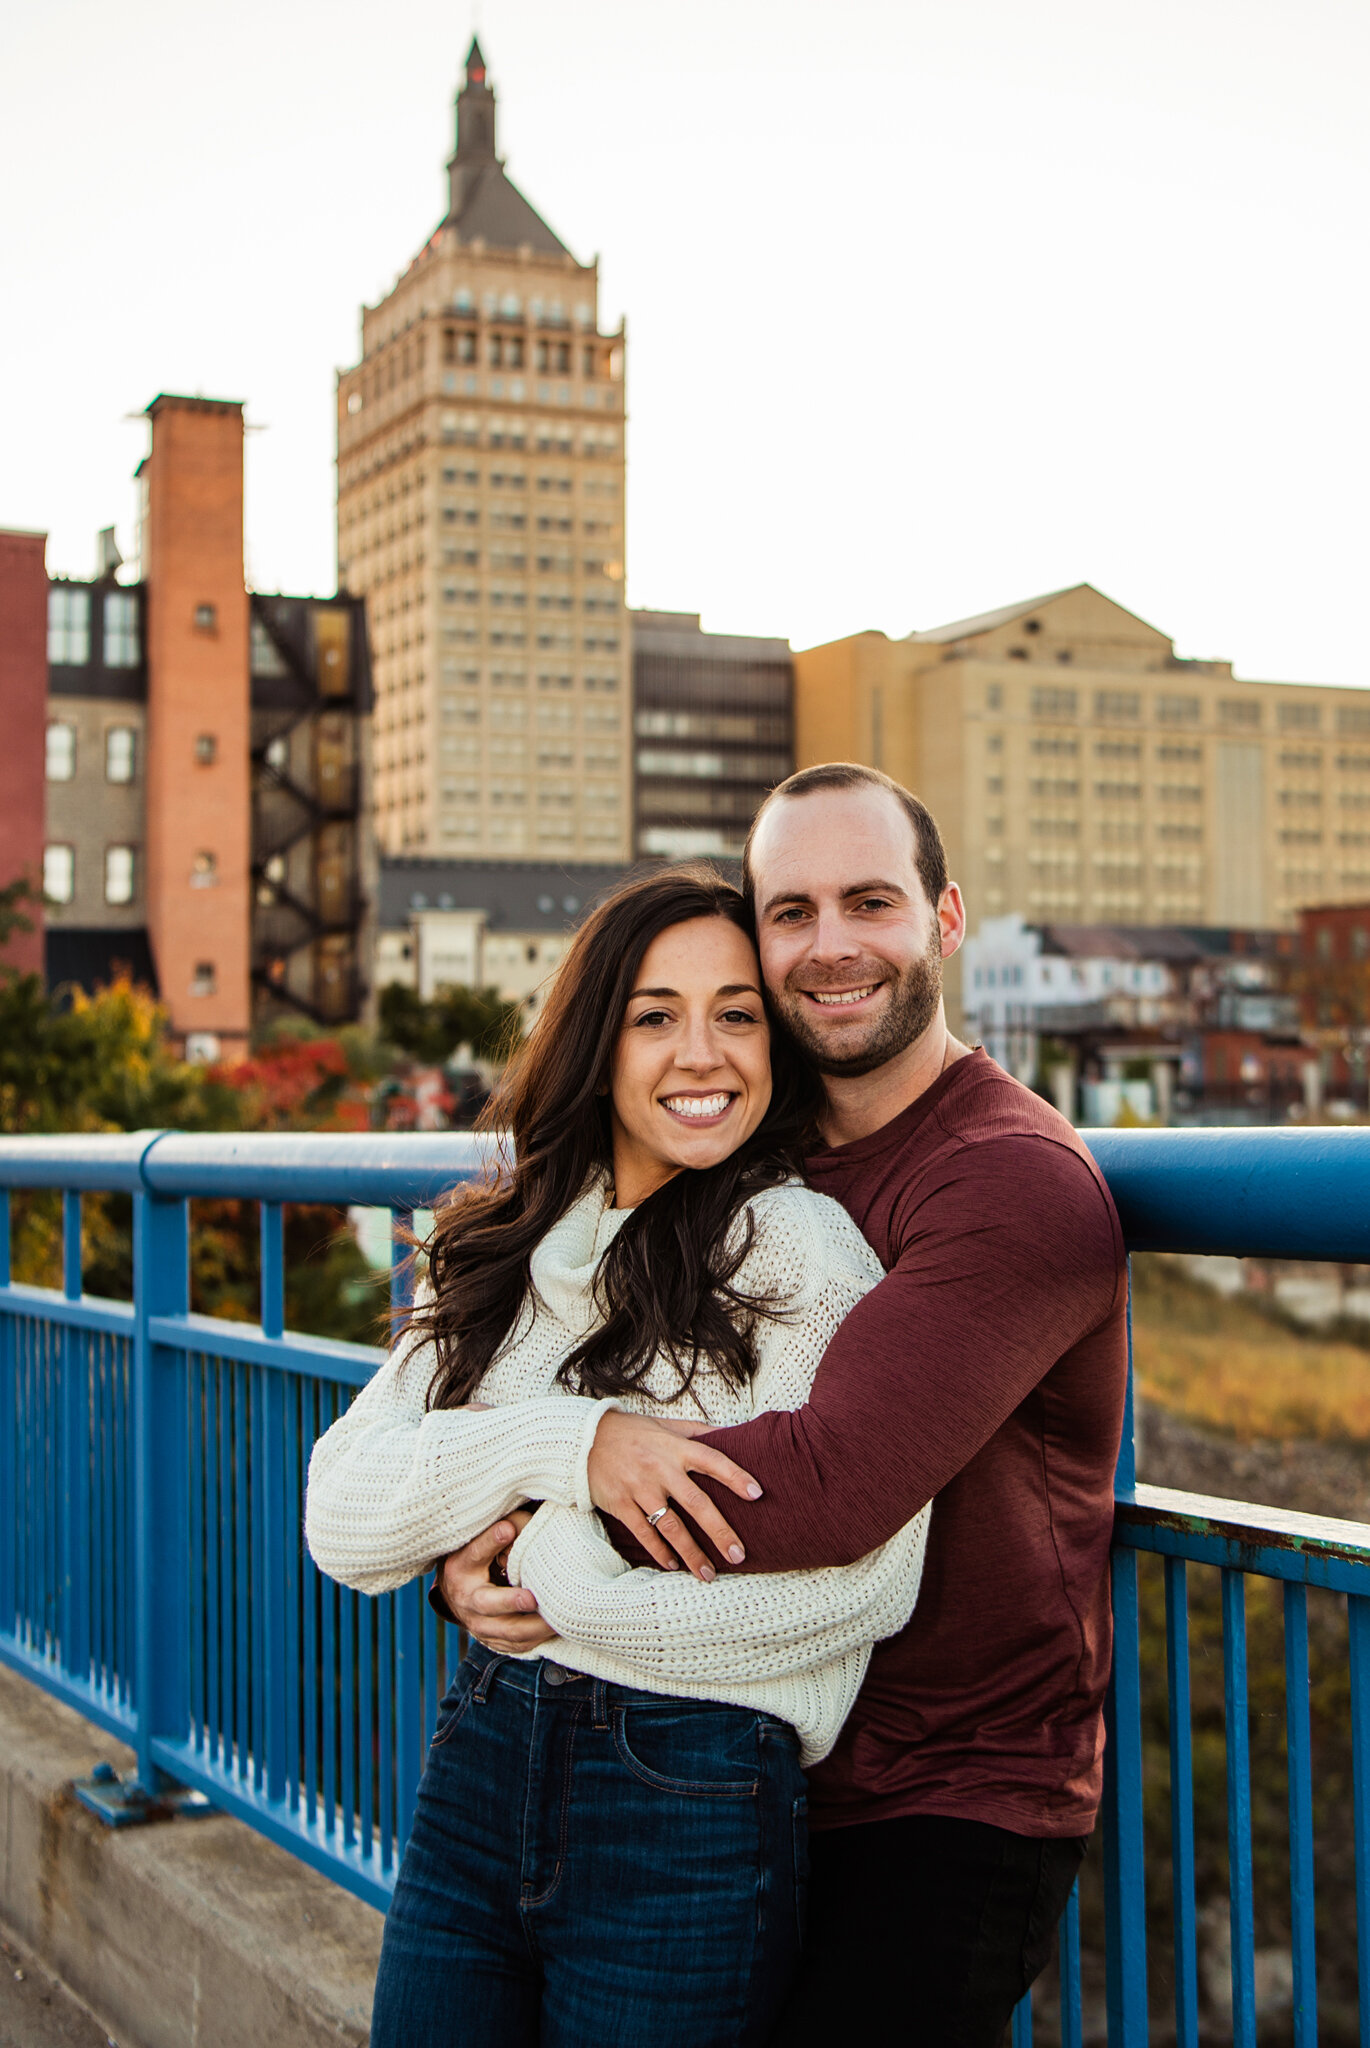 Genesee_Valley_Club_High_Falls_Rochester_Engagement_Session_JILL_STUDIO_Rochester_NY_Photographer_1494.jpg